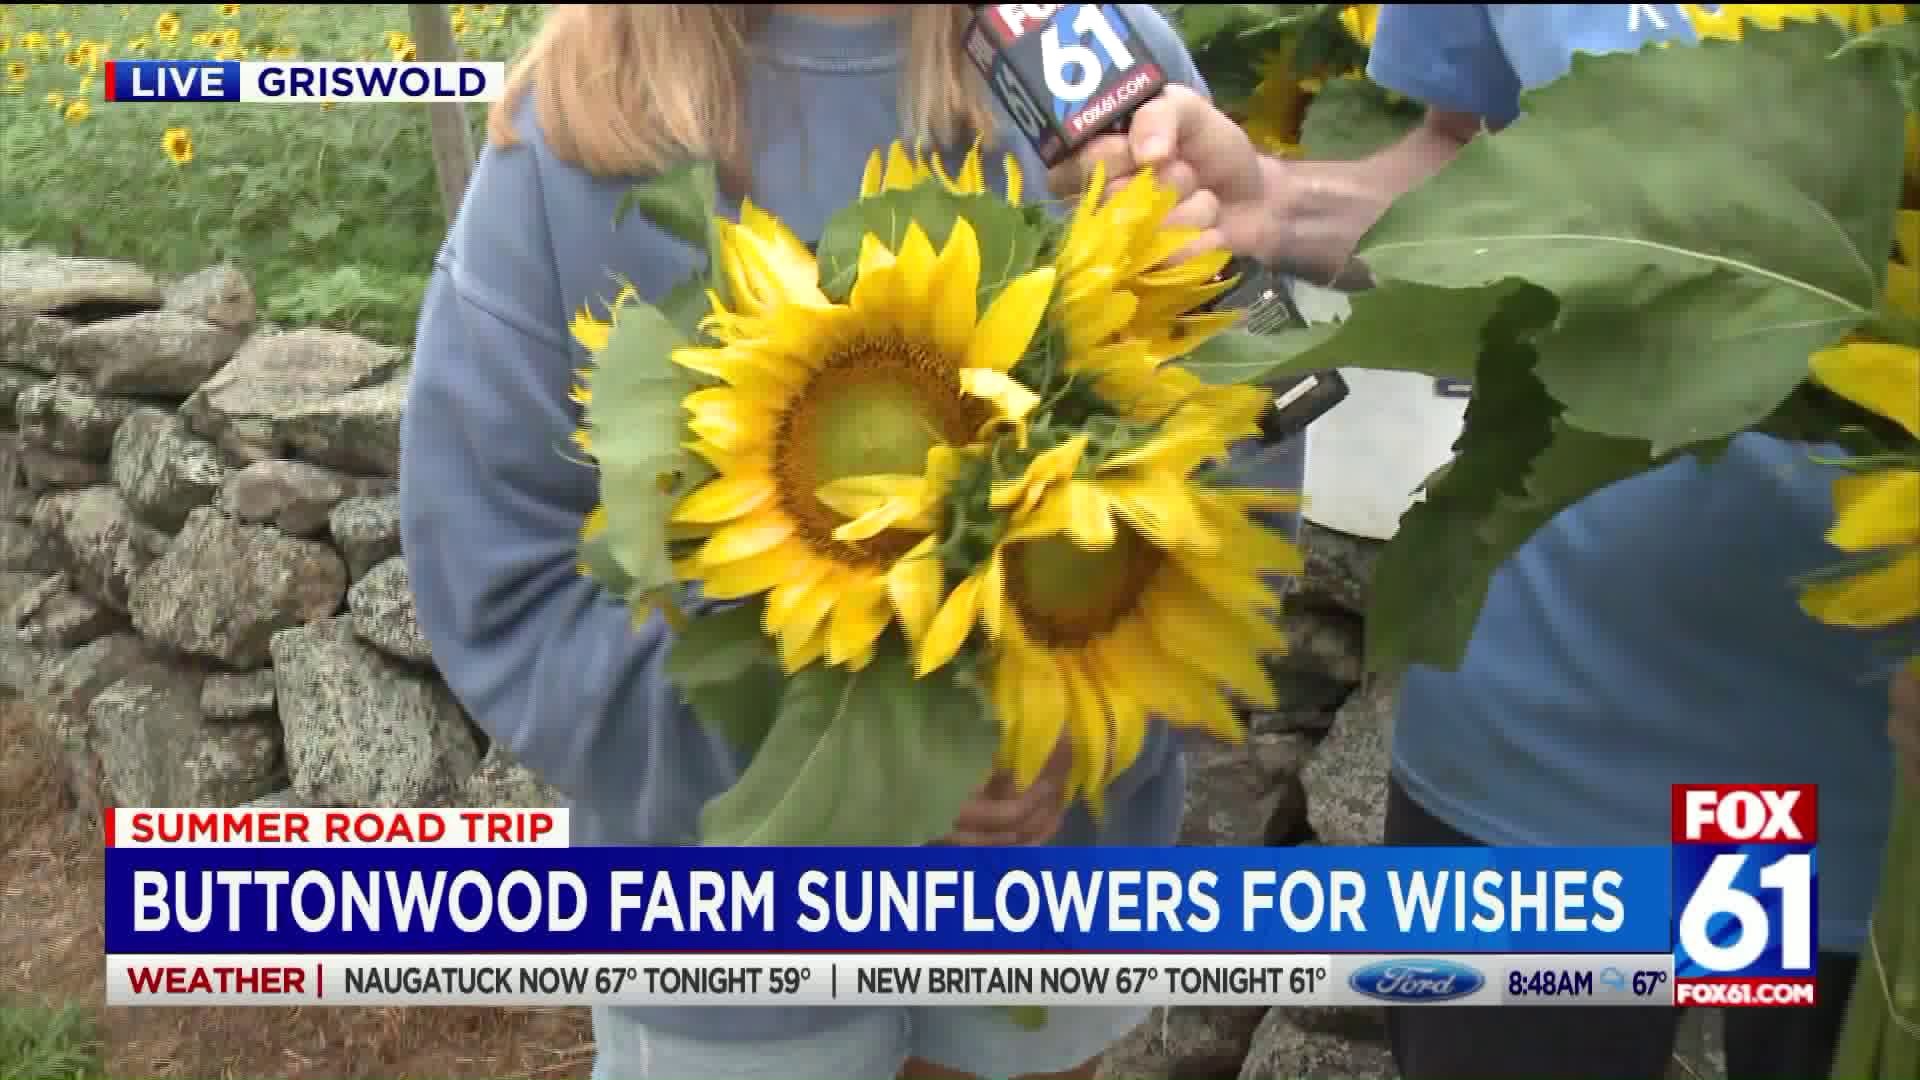 Sunflowers for wishes at Buttonwood Farm